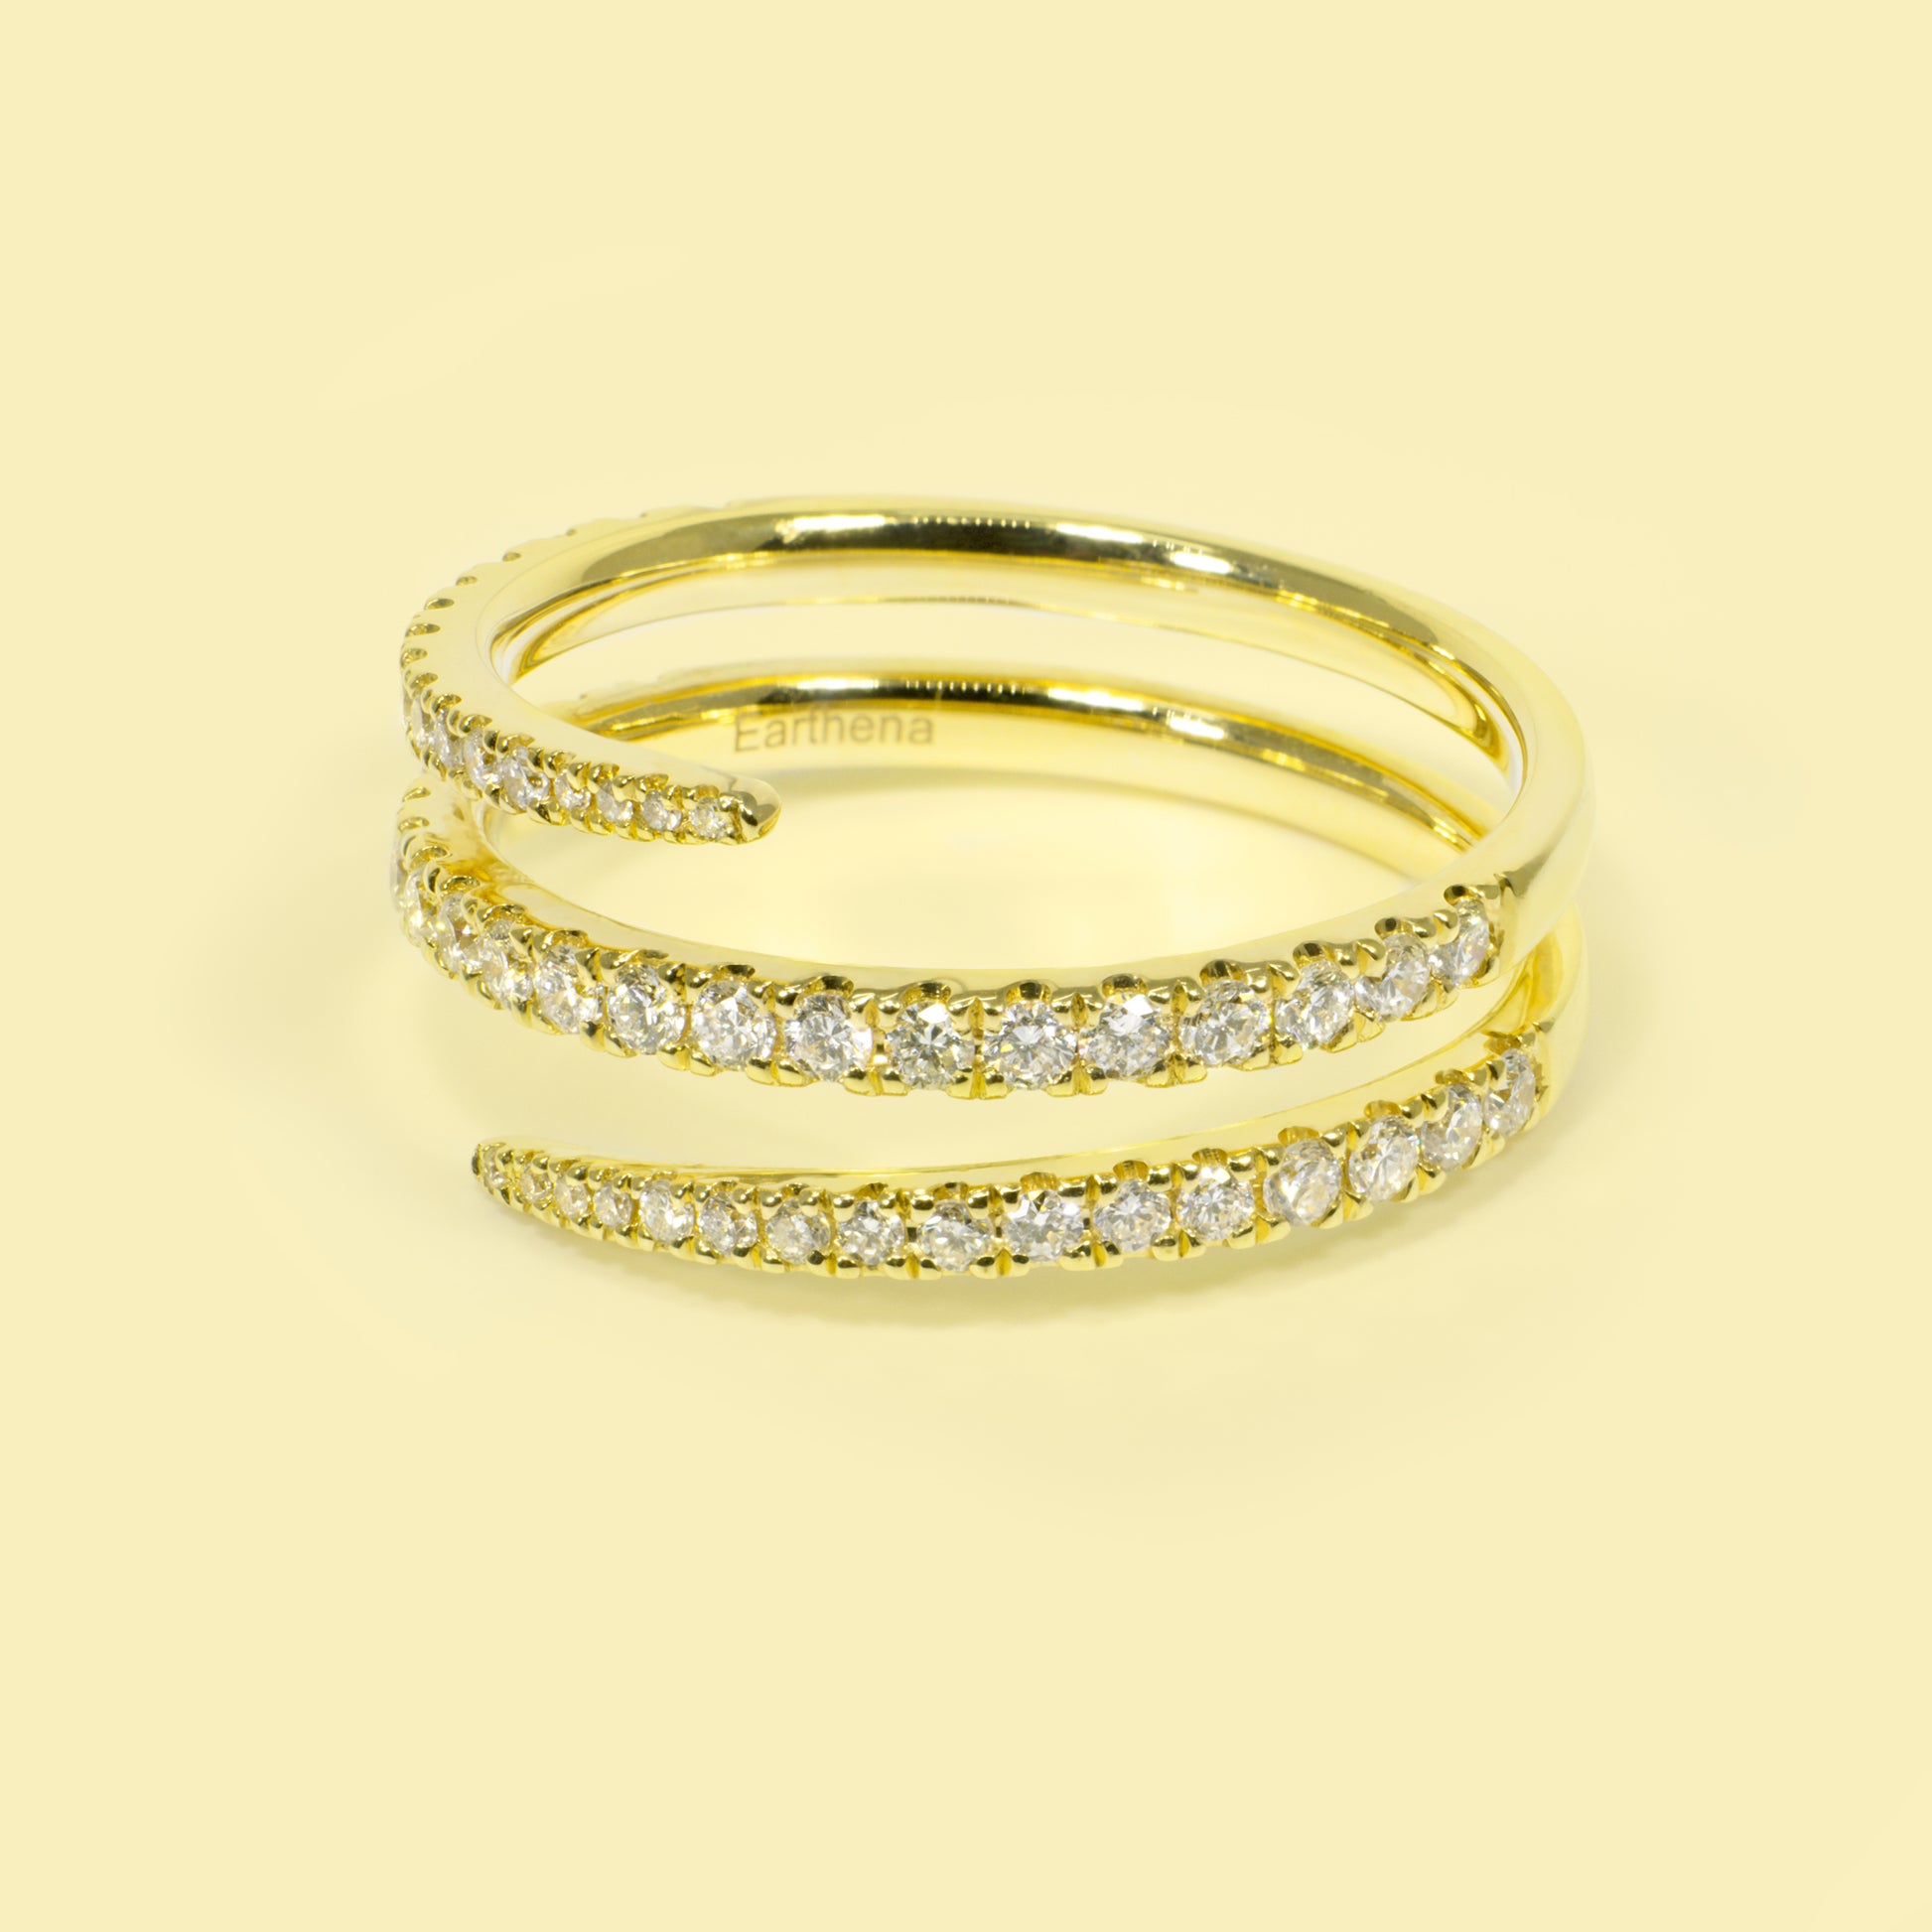 Shae Triple Wrap Stackable Coil Lab-grown Diamond Ring Handcrafted in 14K or 18K Solid Gold by Earthena Jewelry